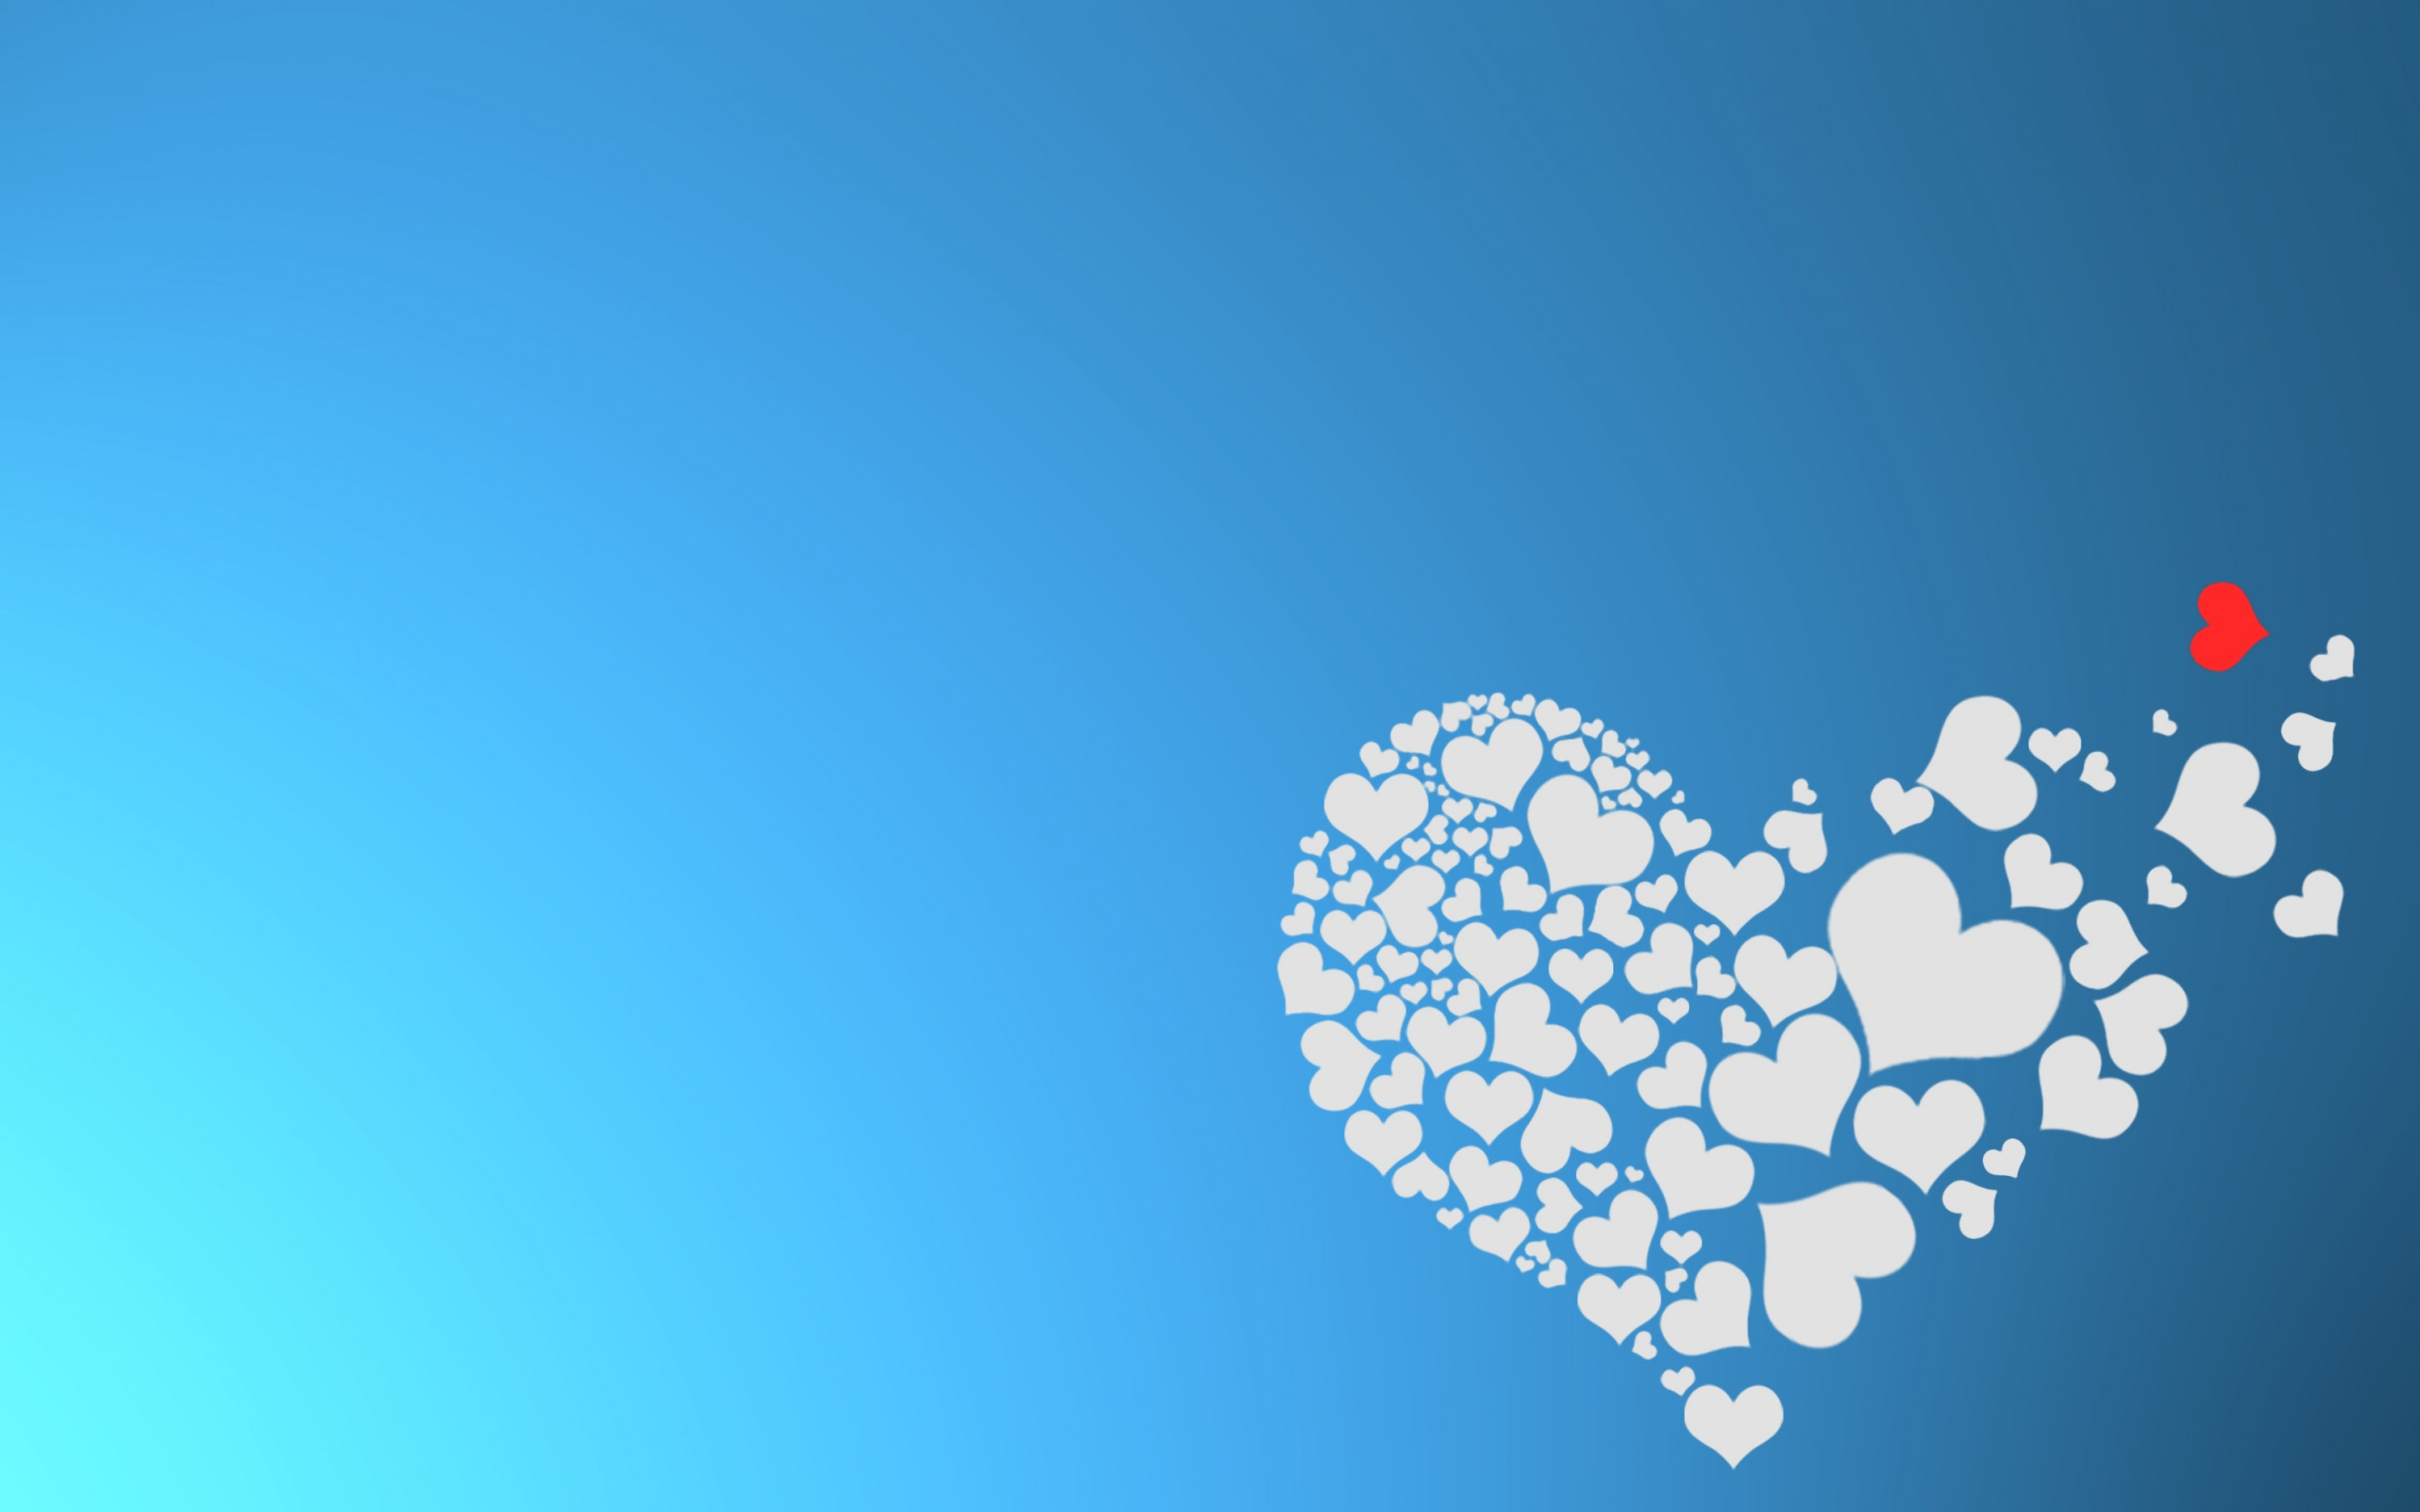 The hearts of love wallpaper 2880x1800